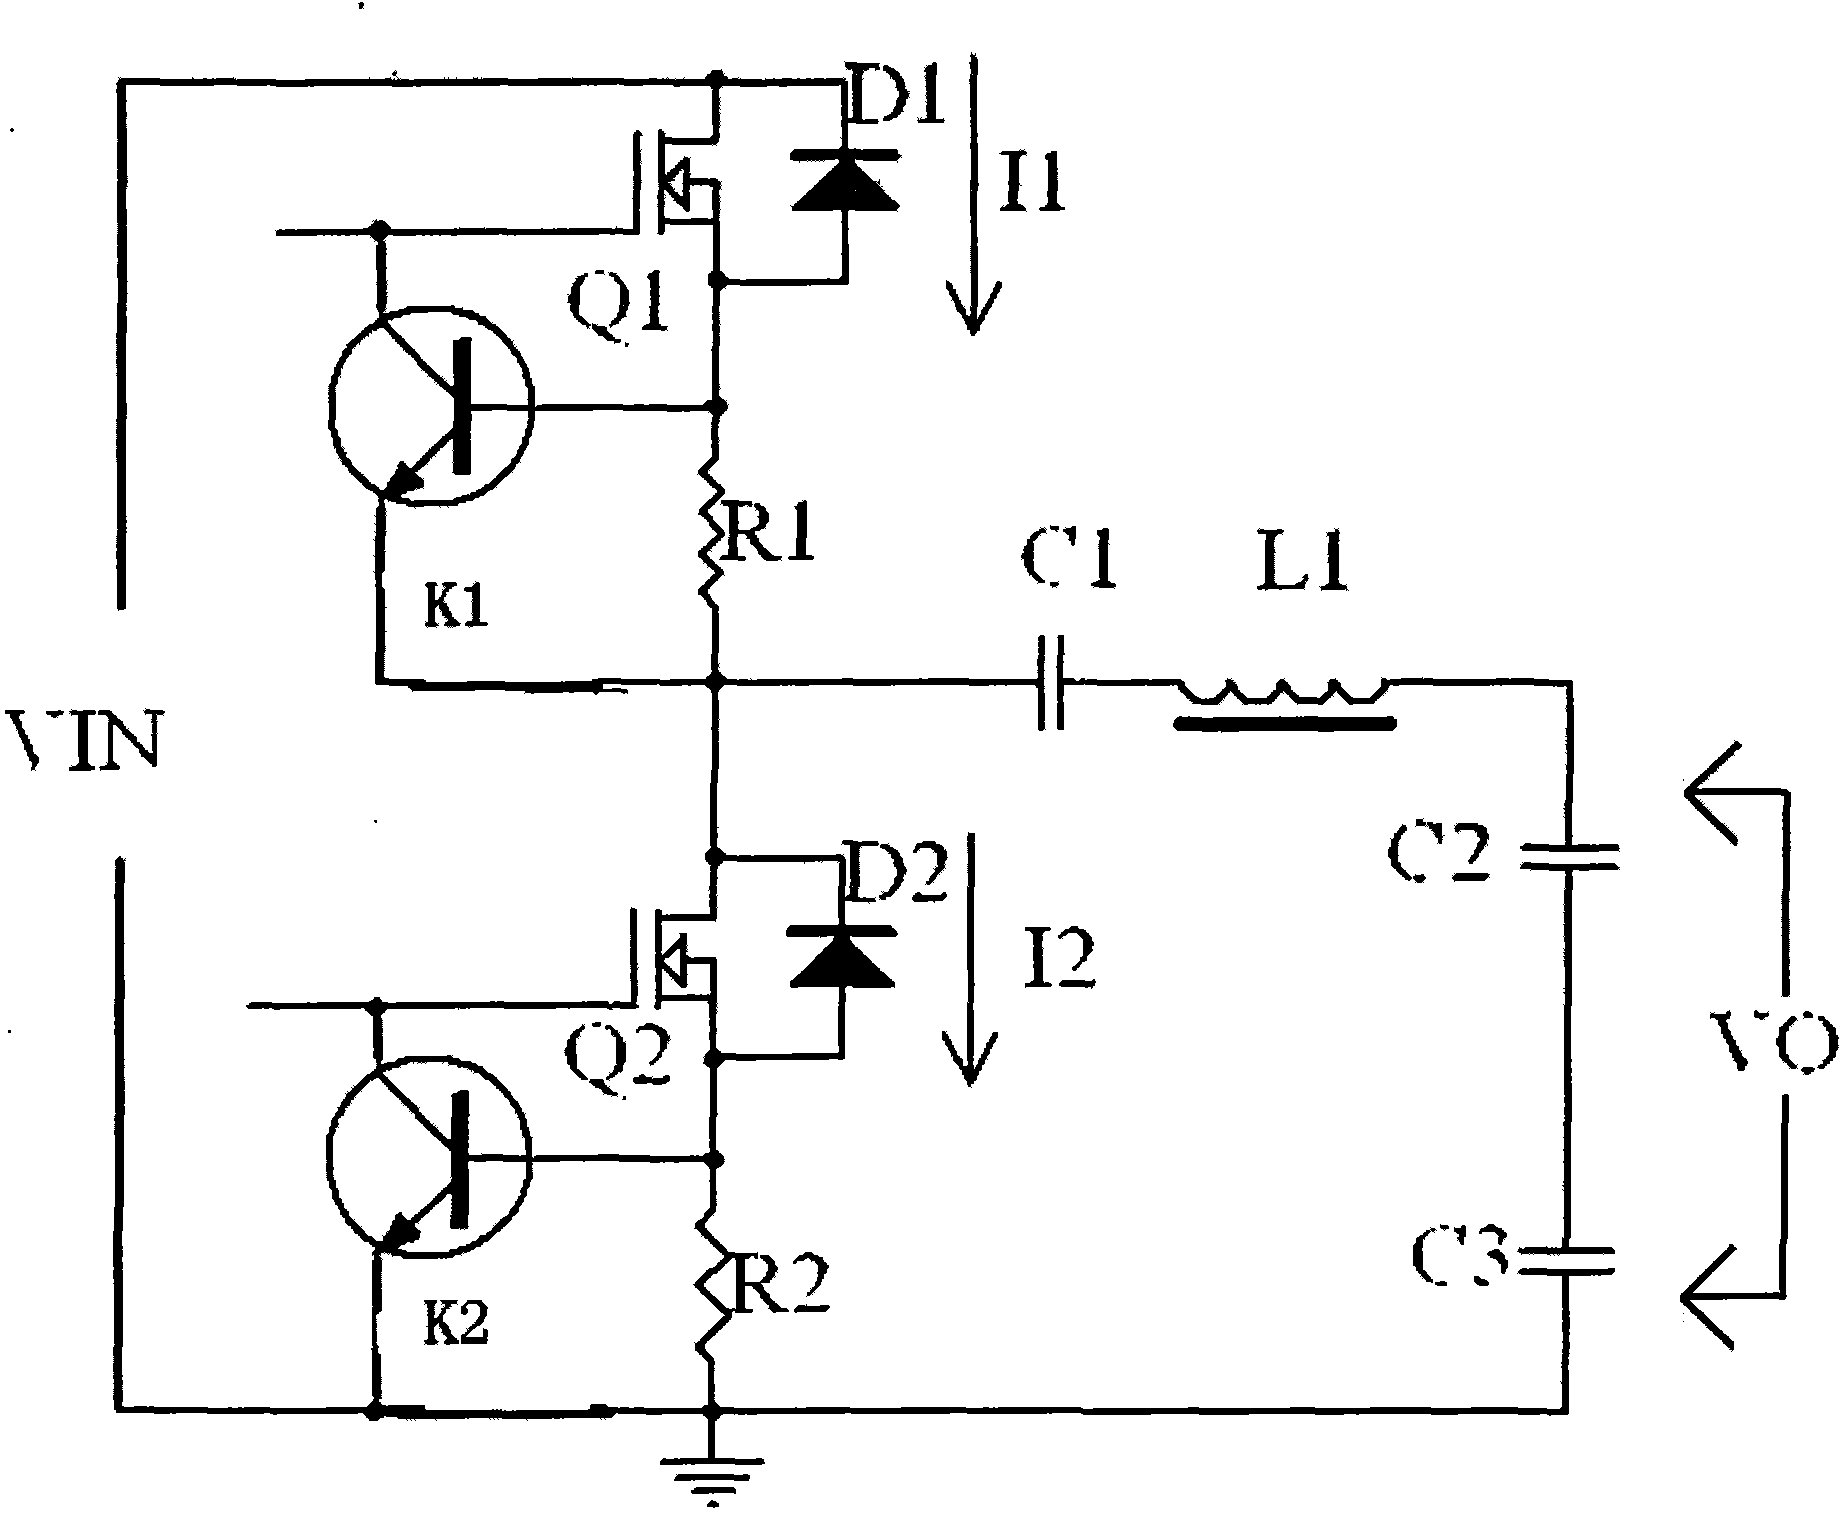 Bridge type LC (inductance capacitance) resonance circuit with overcurrent protection function